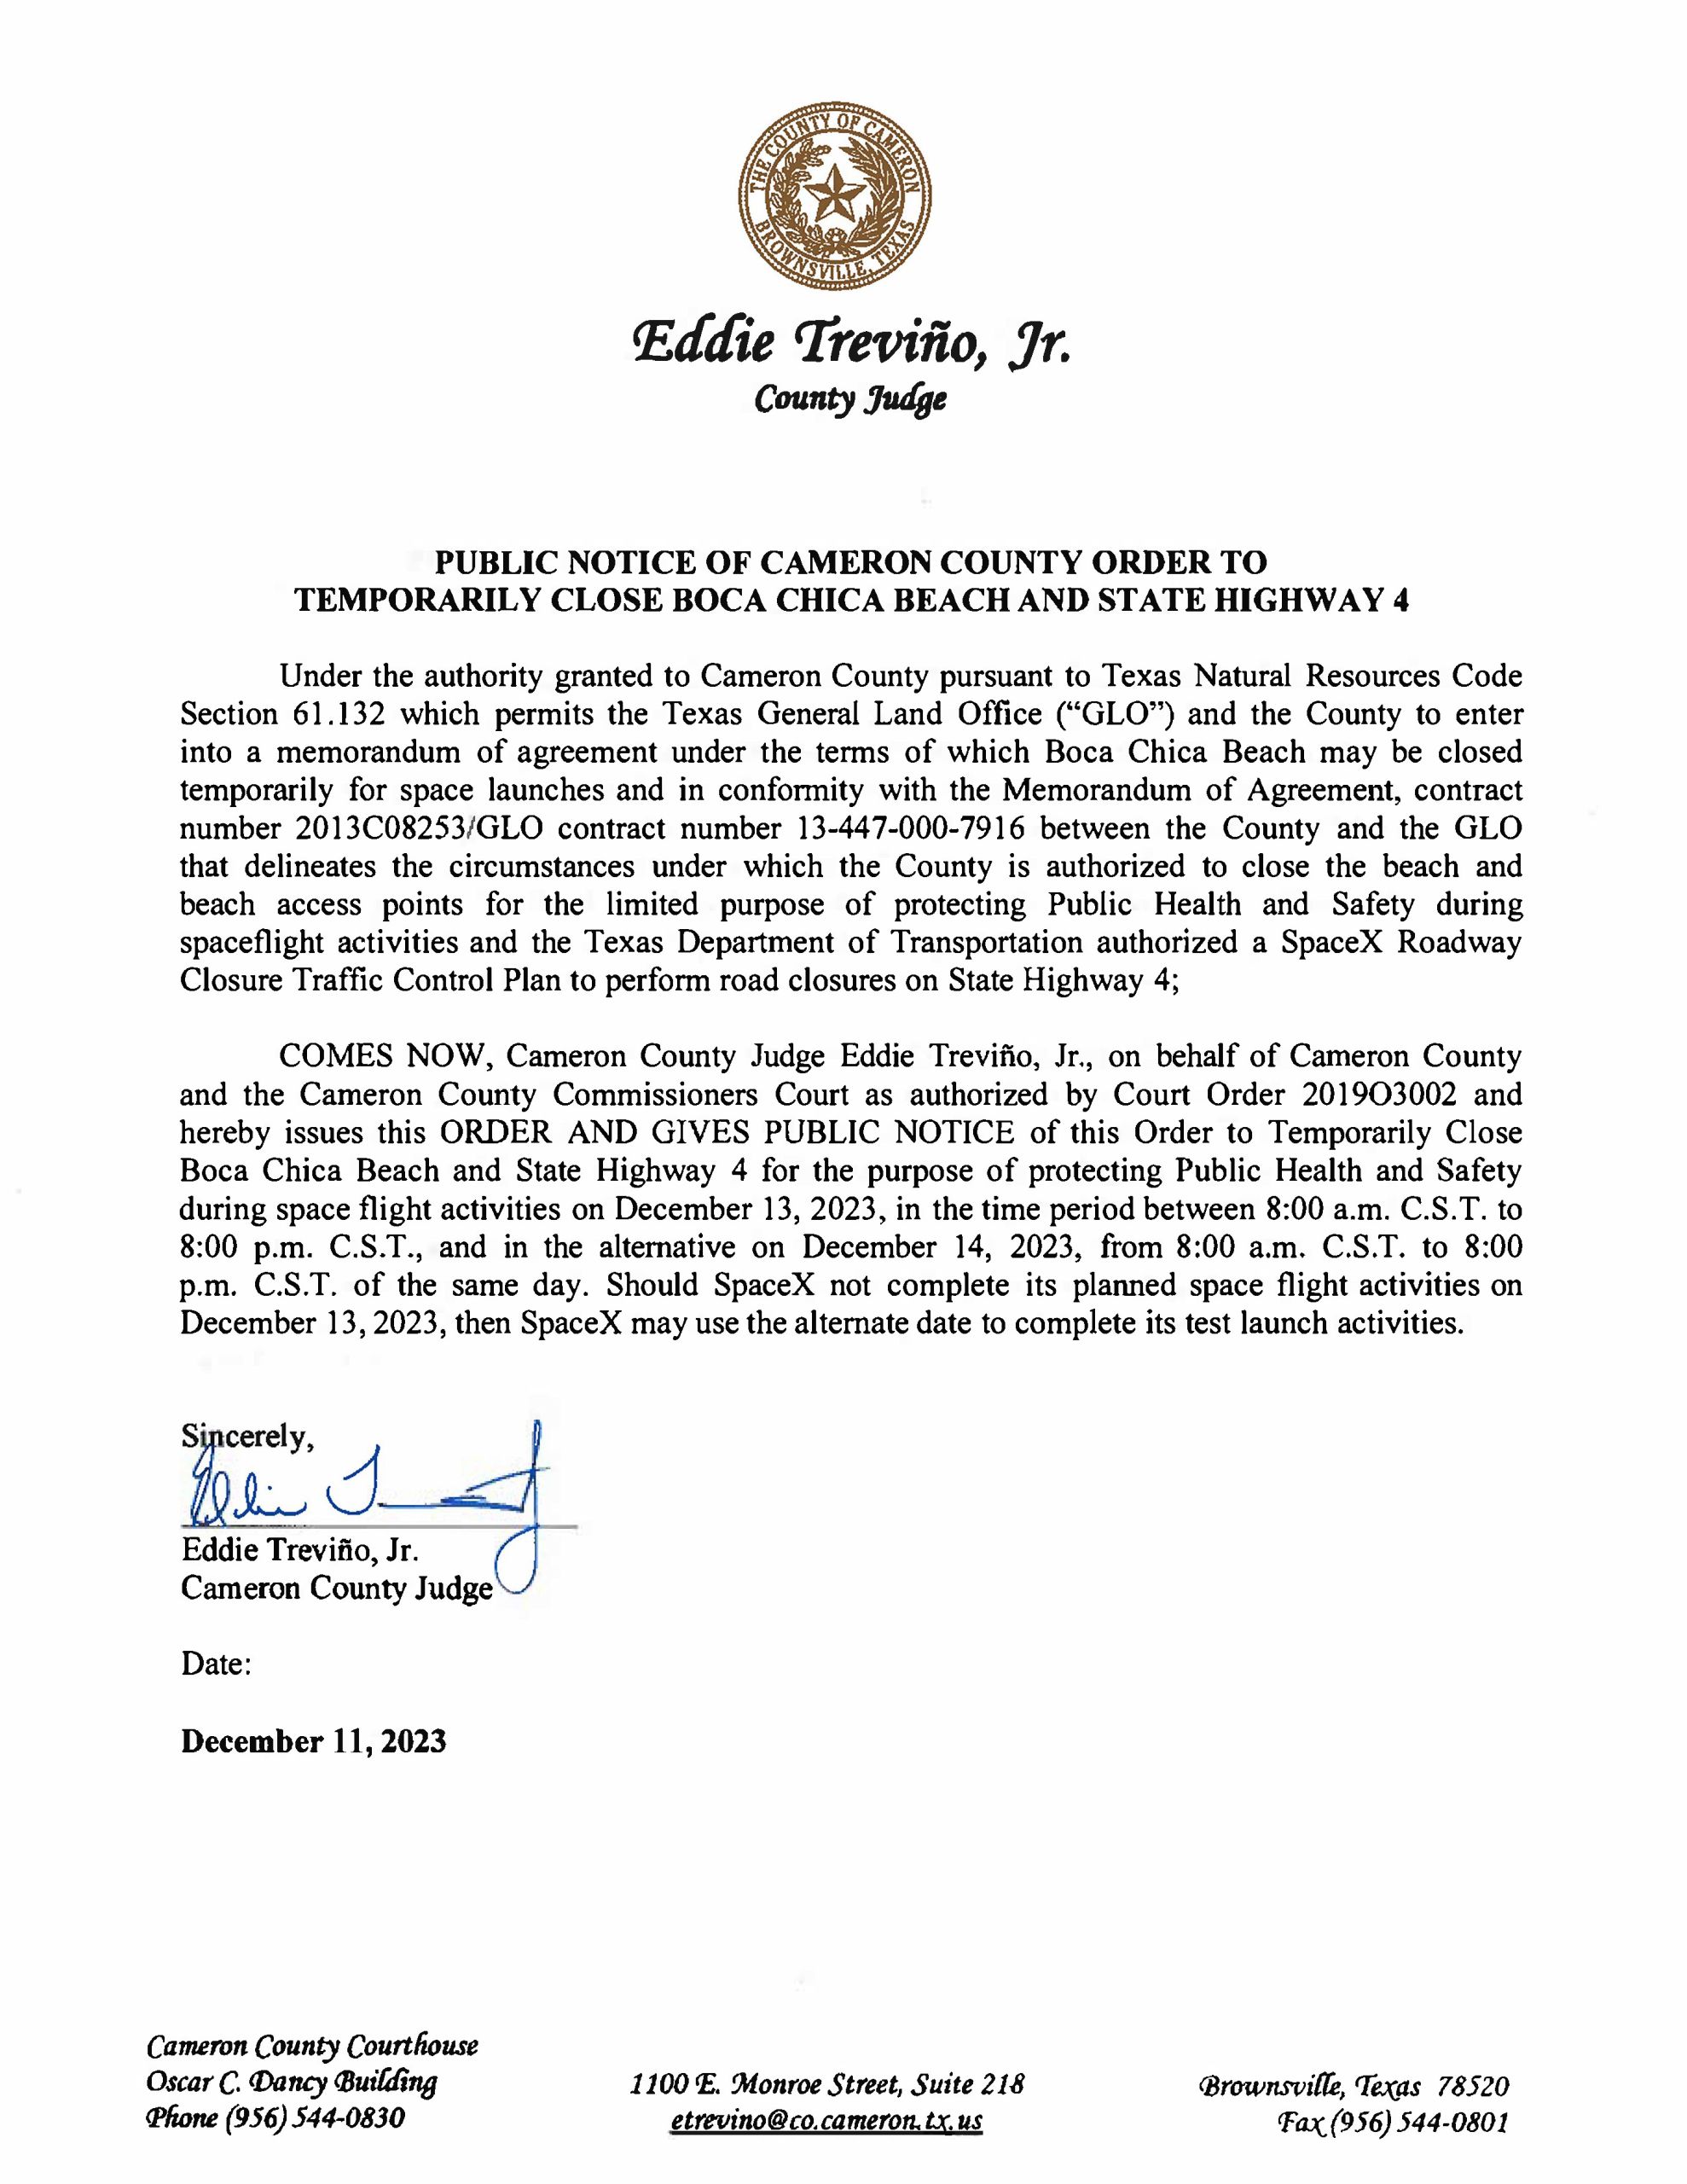 PUBLIC NOTICE OF CAMERON COUNTY ORDER TO TEMP. BEACH CLOSURE AND HWY.12.13.2023.docx Scaled